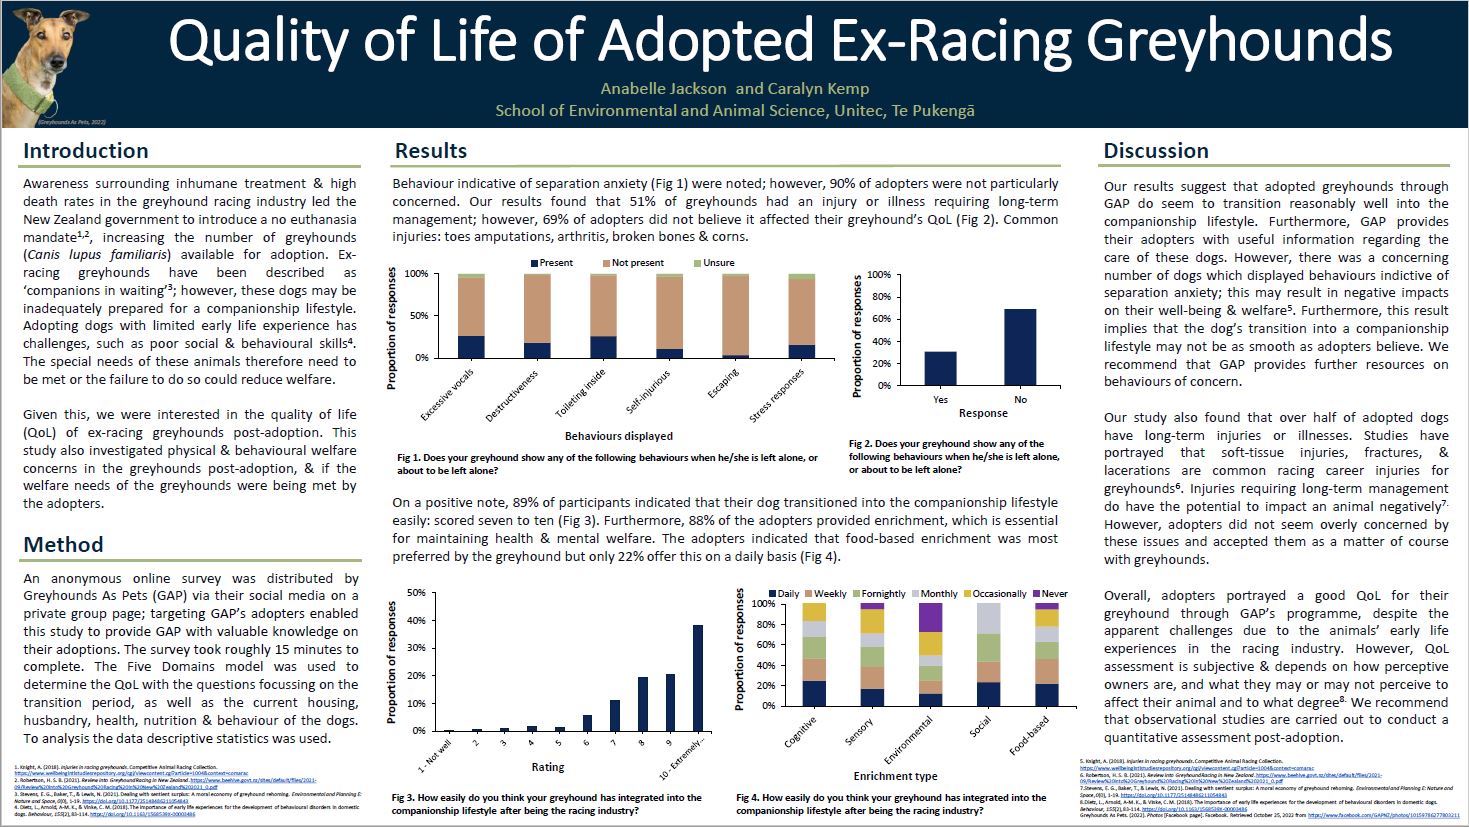 Thumbnail of Quality of Life of Adopted Ex-Racing Greyhounds